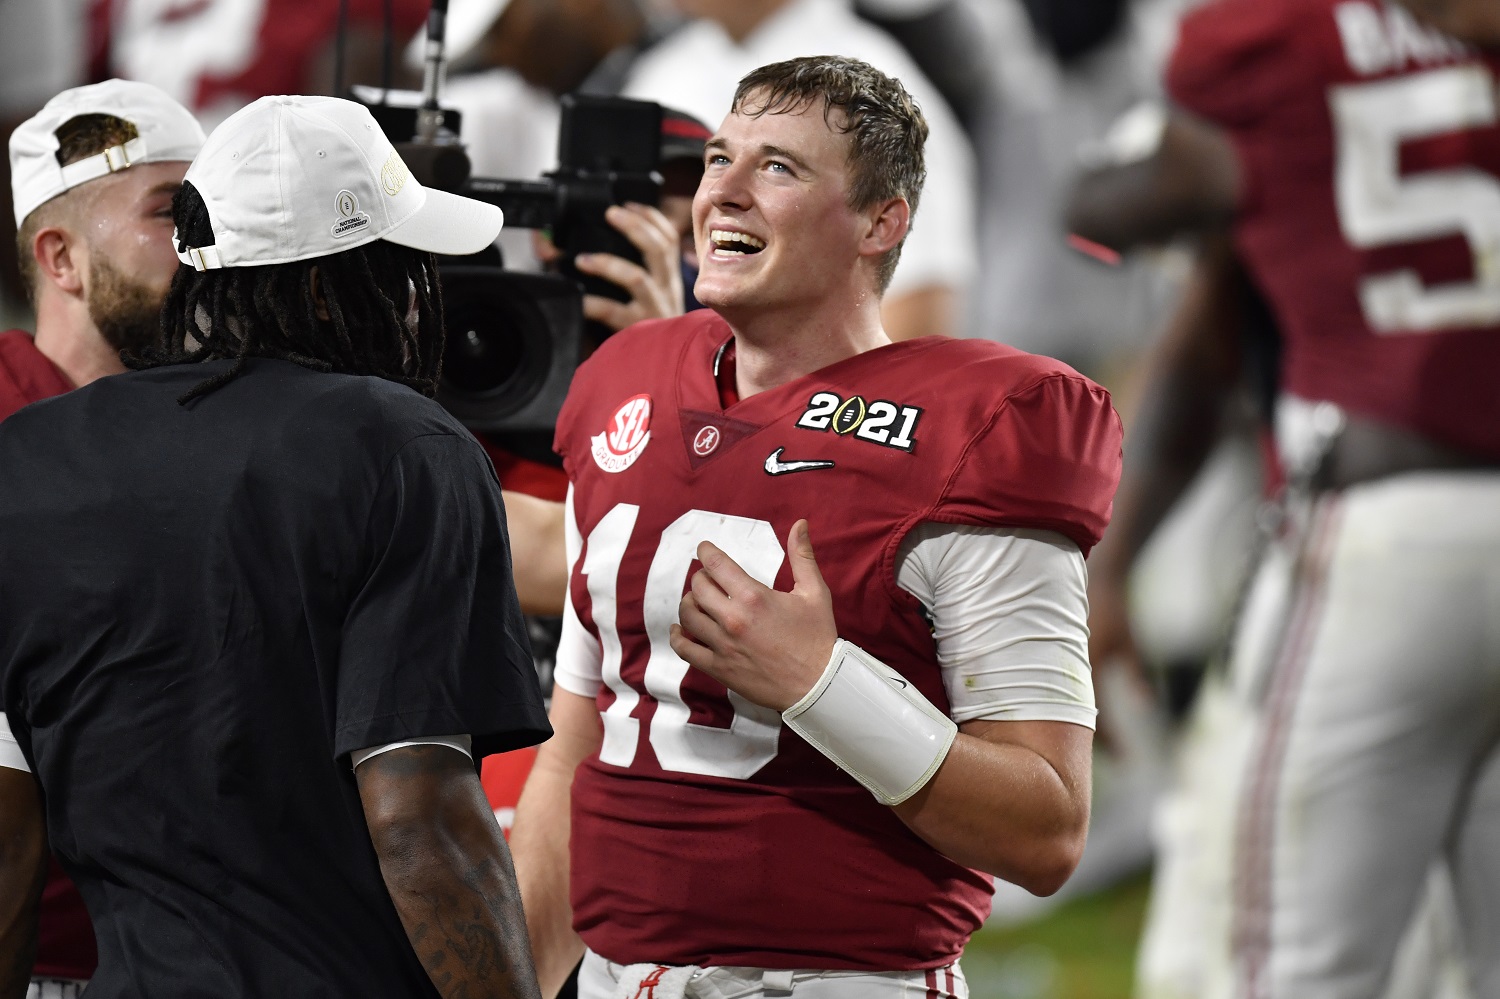 Quarterback Mac Jones will go high in the 2021 NFL draft after leading Alabama to its sixth FBS championship in 12 seasons.